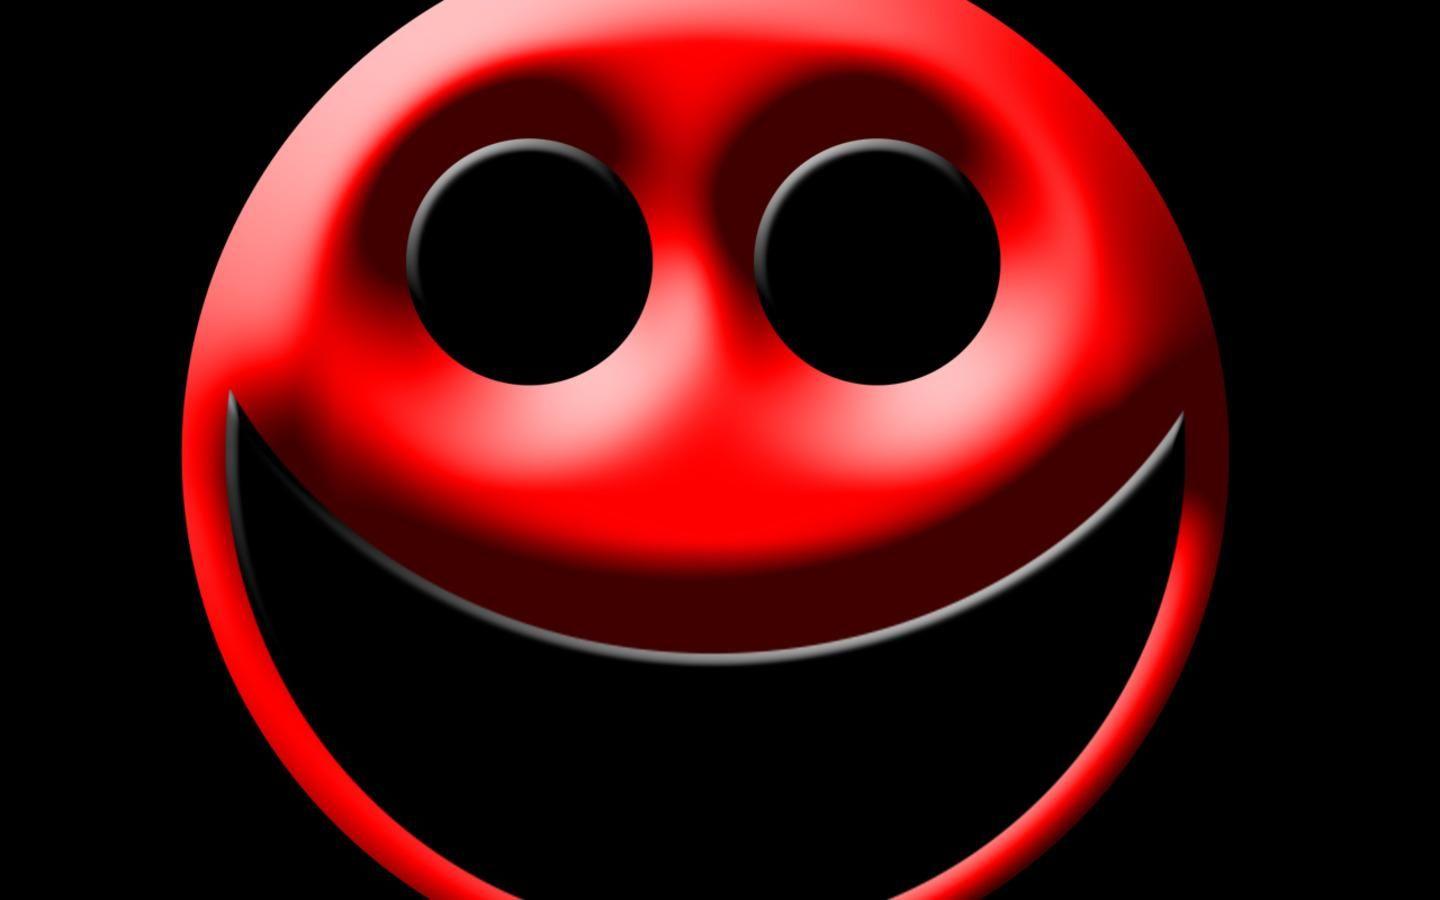 Red Hot. Smiley, Red black